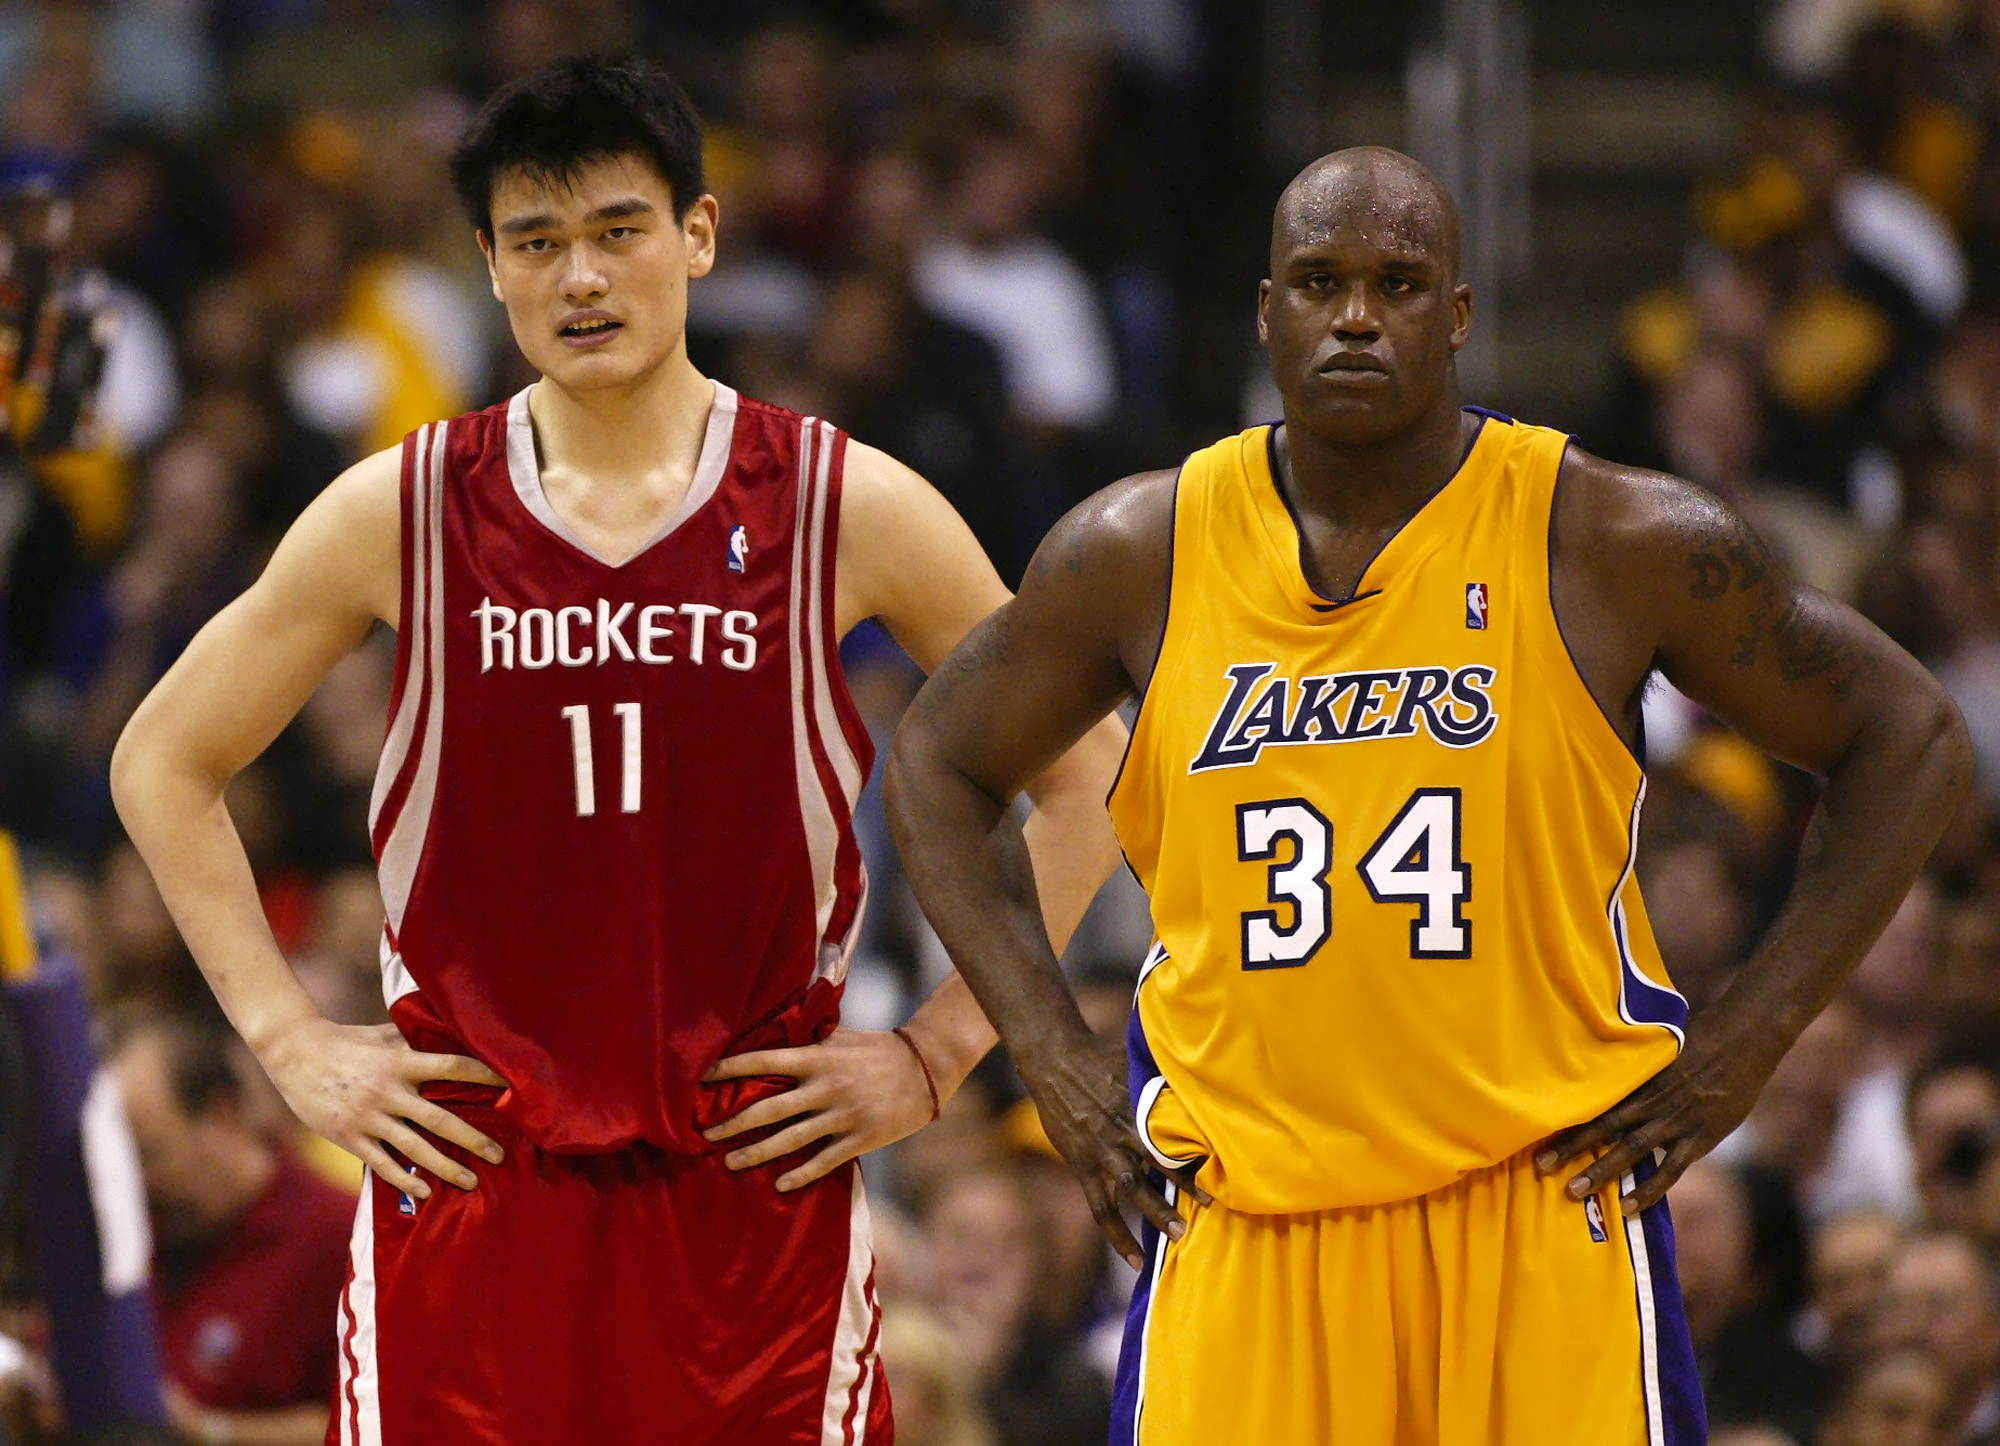 Houston Rockets' Yao Ming, of China, left, stands next to Los Angeles Lakers center Shaquille O'Neal during the second half of a first round NBA Western Conference playoff game on Saturday night, April 17, 2004, in Los Angeles. The Lakers won 72-71. (AP Photo/Mark J. Terrill) ORG XMIT: LAS116